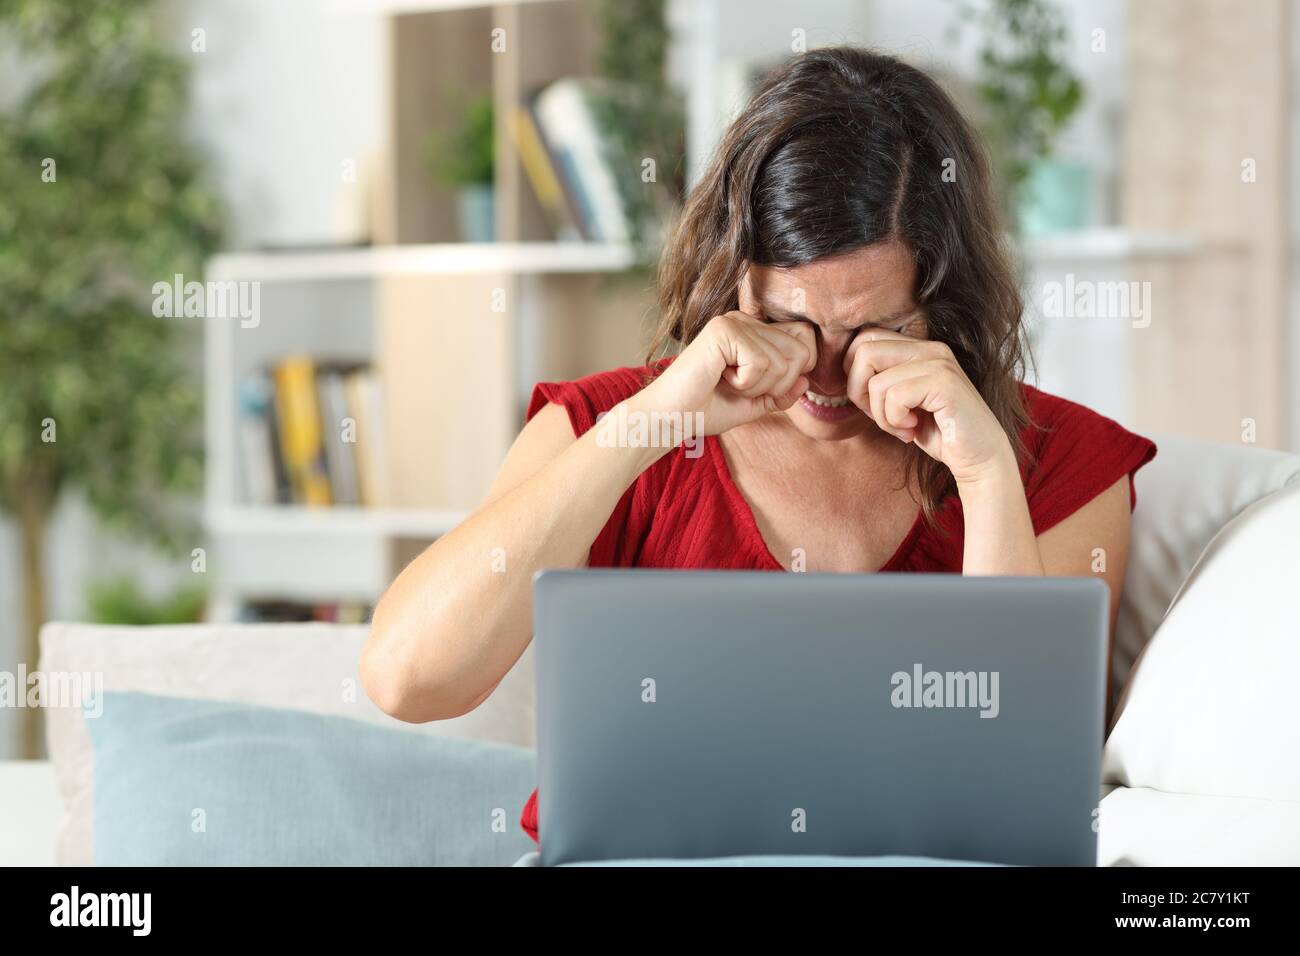 Adult woman with laptop scratching itchy eyes sitting in the sofa in the living room at home Stock Photo